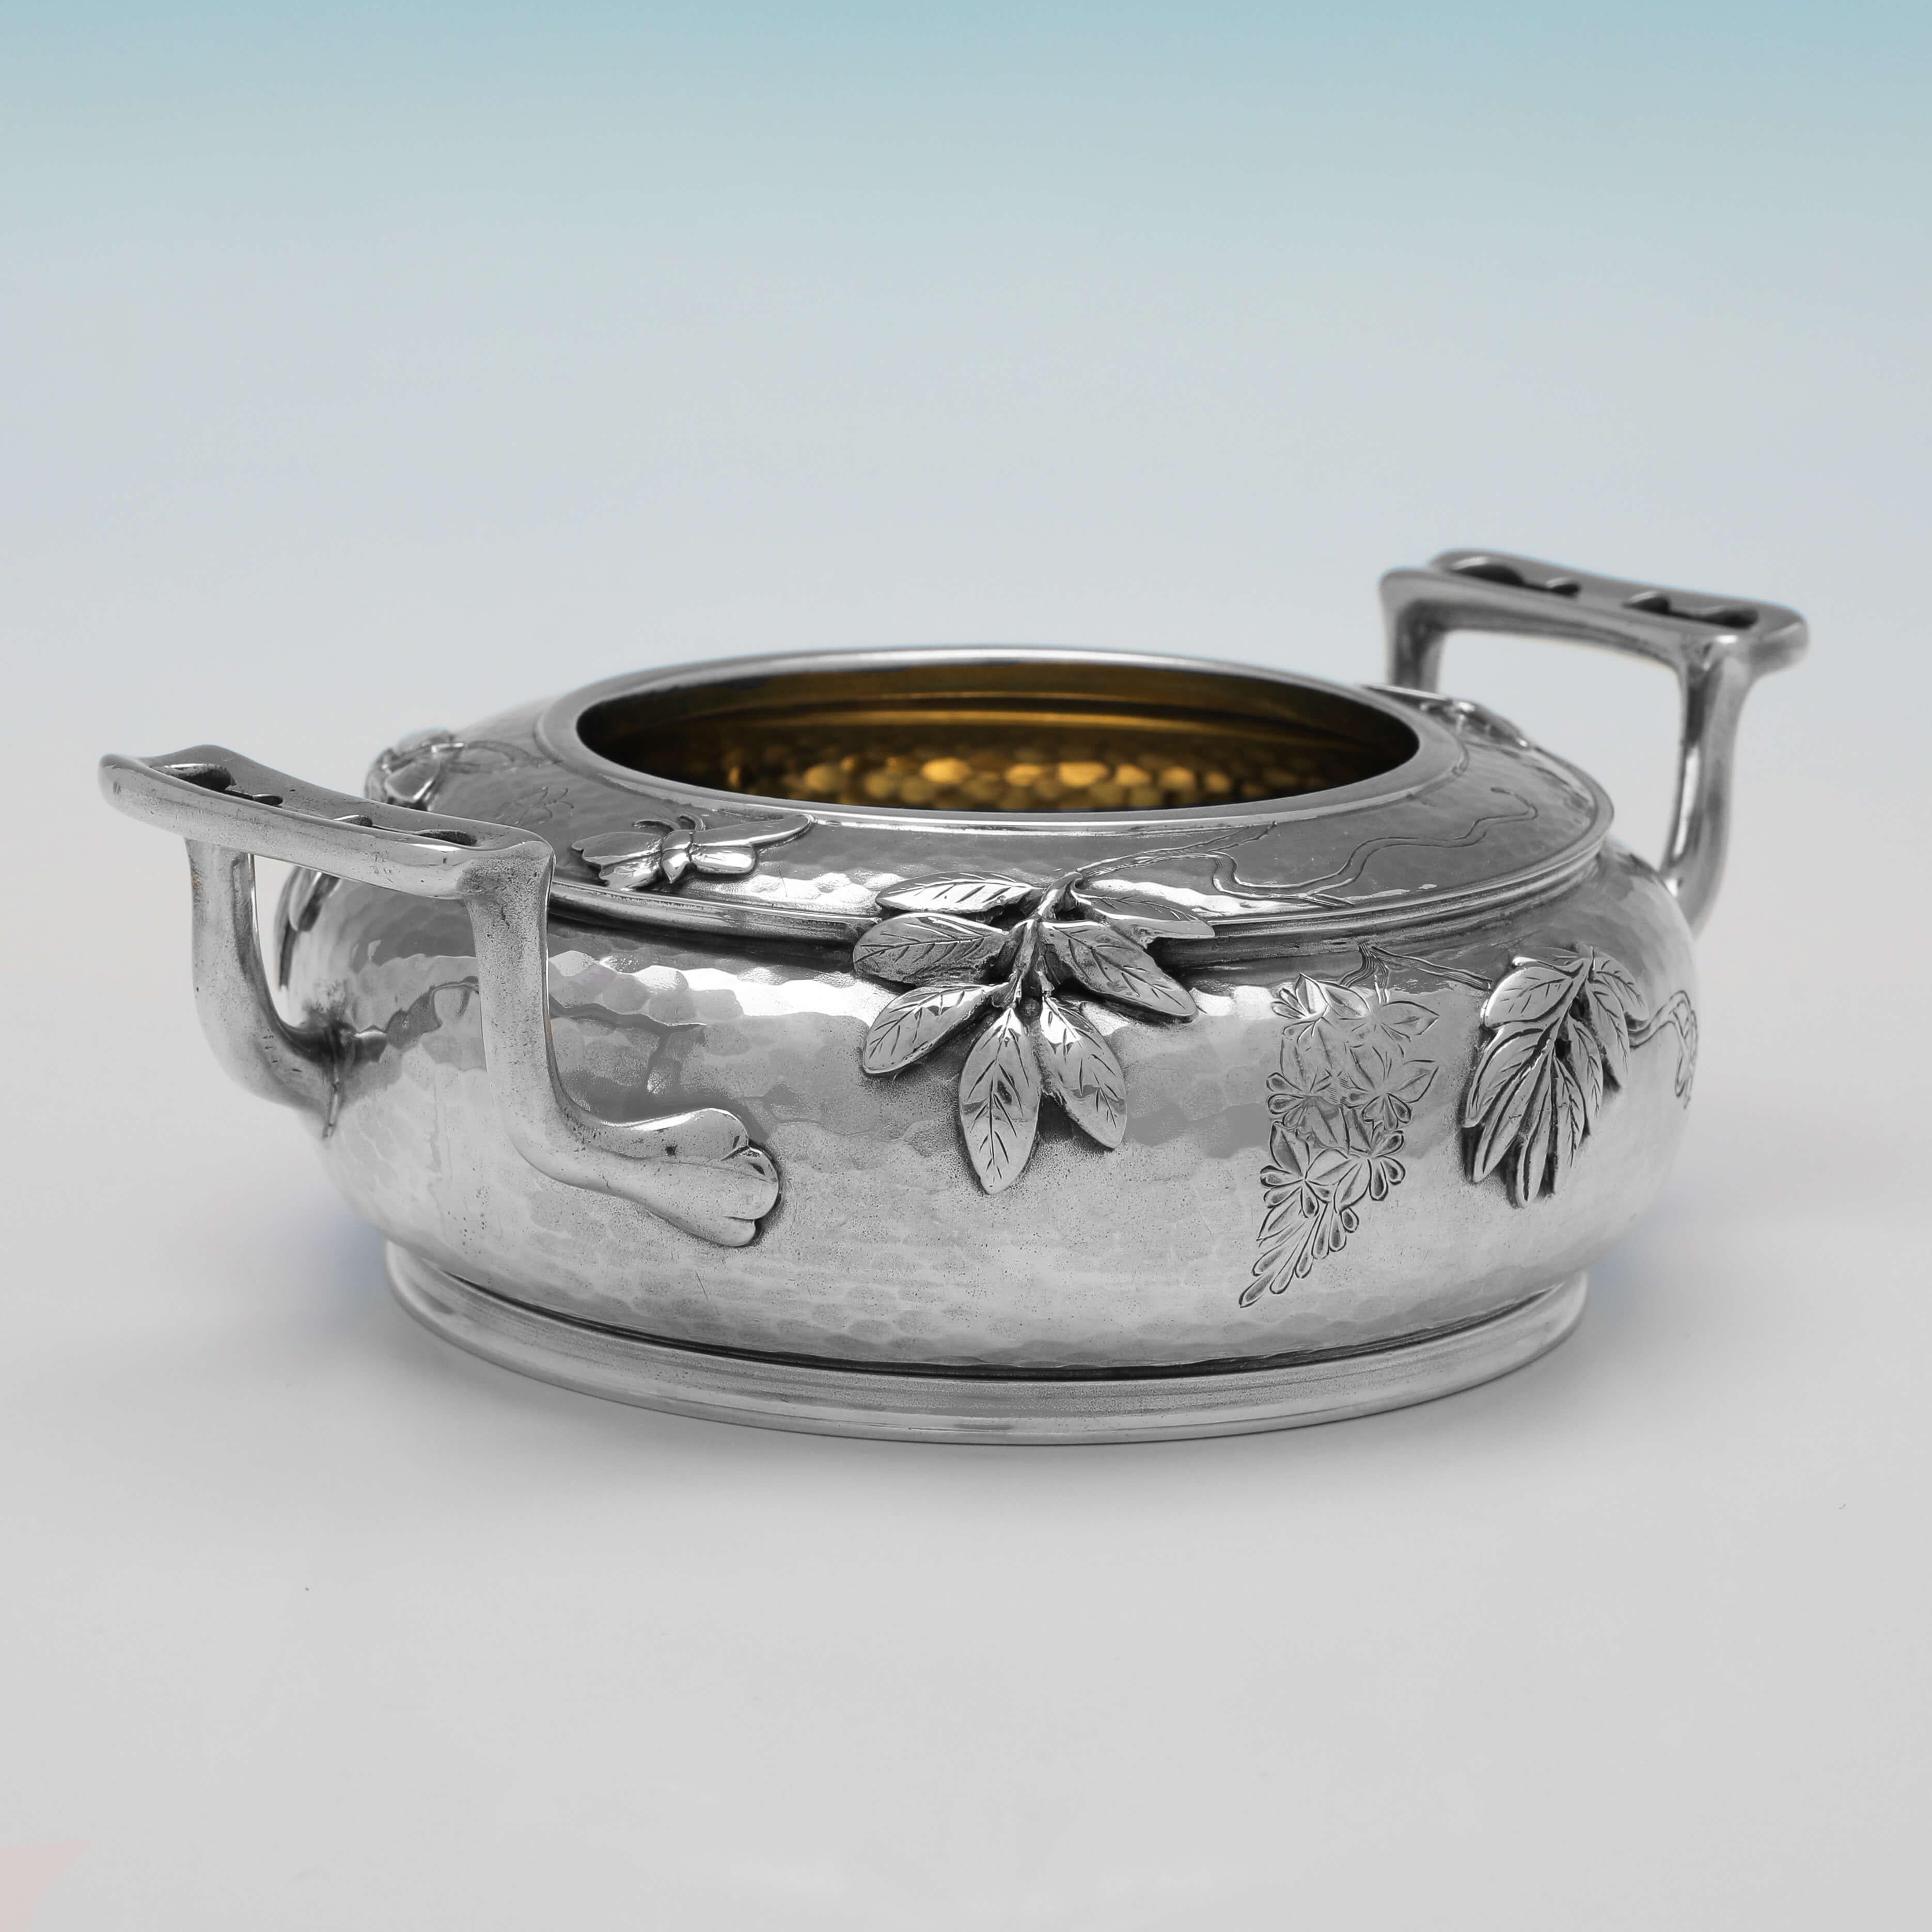 Hallmarked in London in 1879 by Martin, Hall & Co., this stunning, Antique Sterling Silver Bowl, is in the Aesthetic taste, featuring cast and applied floral and butterfly detailing, flat chased decoration, a planished finish, and a gilt interior.